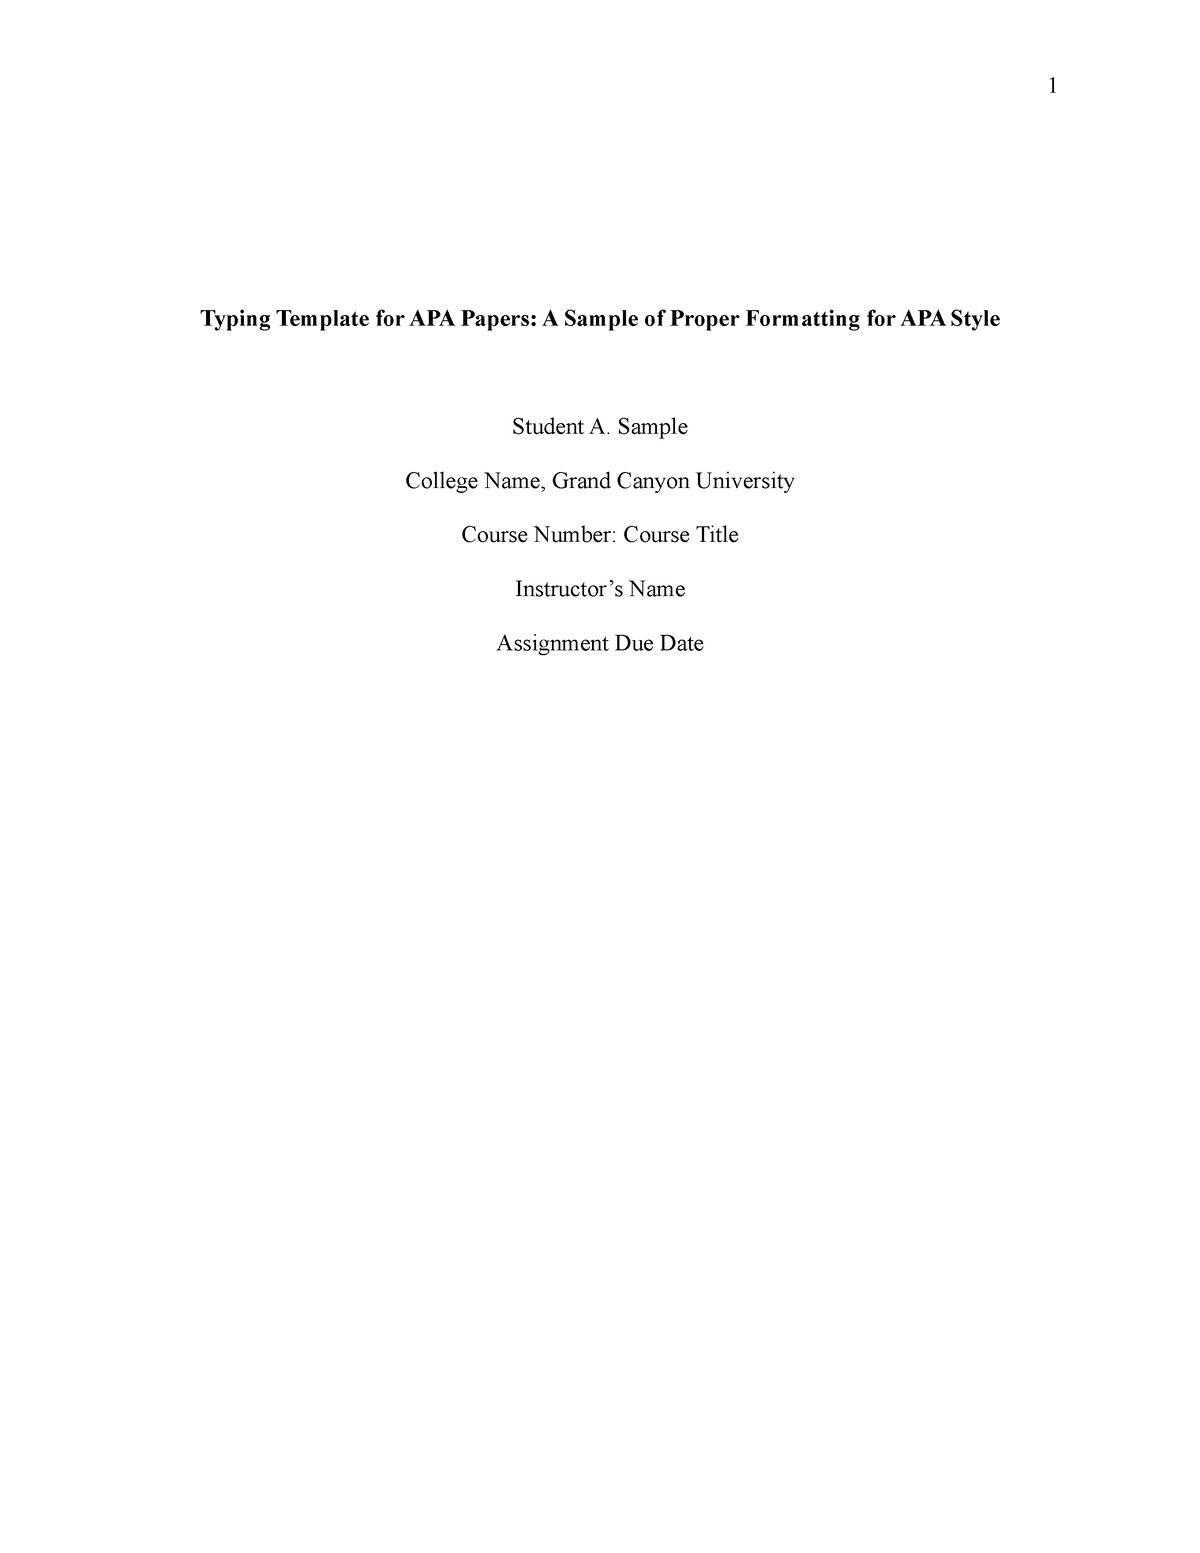 GCU APA 7 Template with comments Typing Template for APA Papers: A